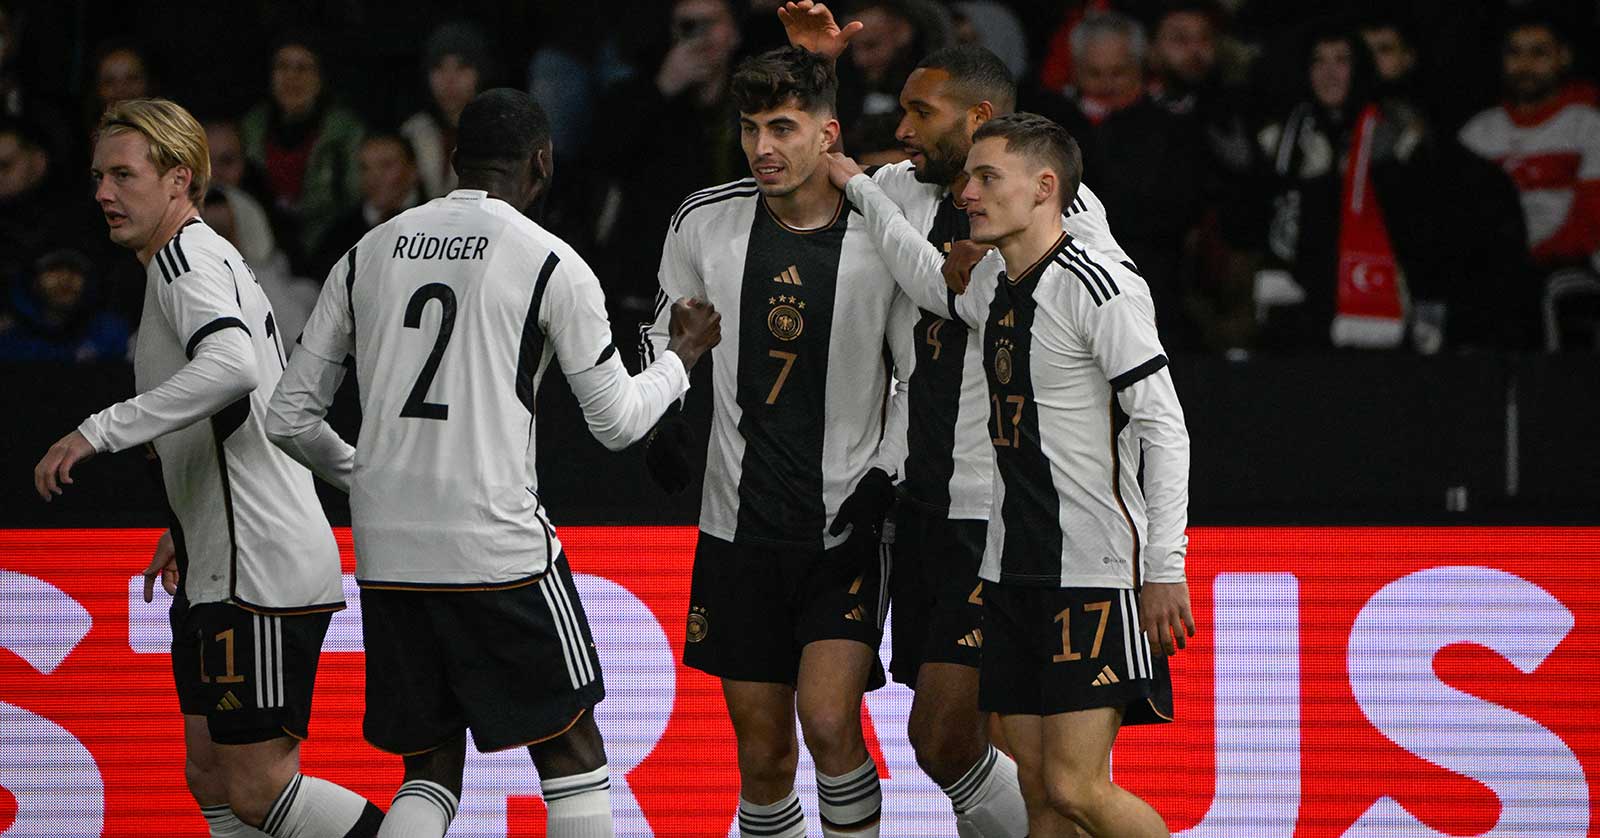 Germany's midfielder #07 Kai Havertz (C) celebrates scoring the opening goal with his teammates during the international friendly football match between Germany and Turkey at the Olympic Stadium in Berlin on November 18, 2023, in preparation for the UEFA Euro 2024 in Germany. (Photo by Tobias SCHWARZ / AFP)